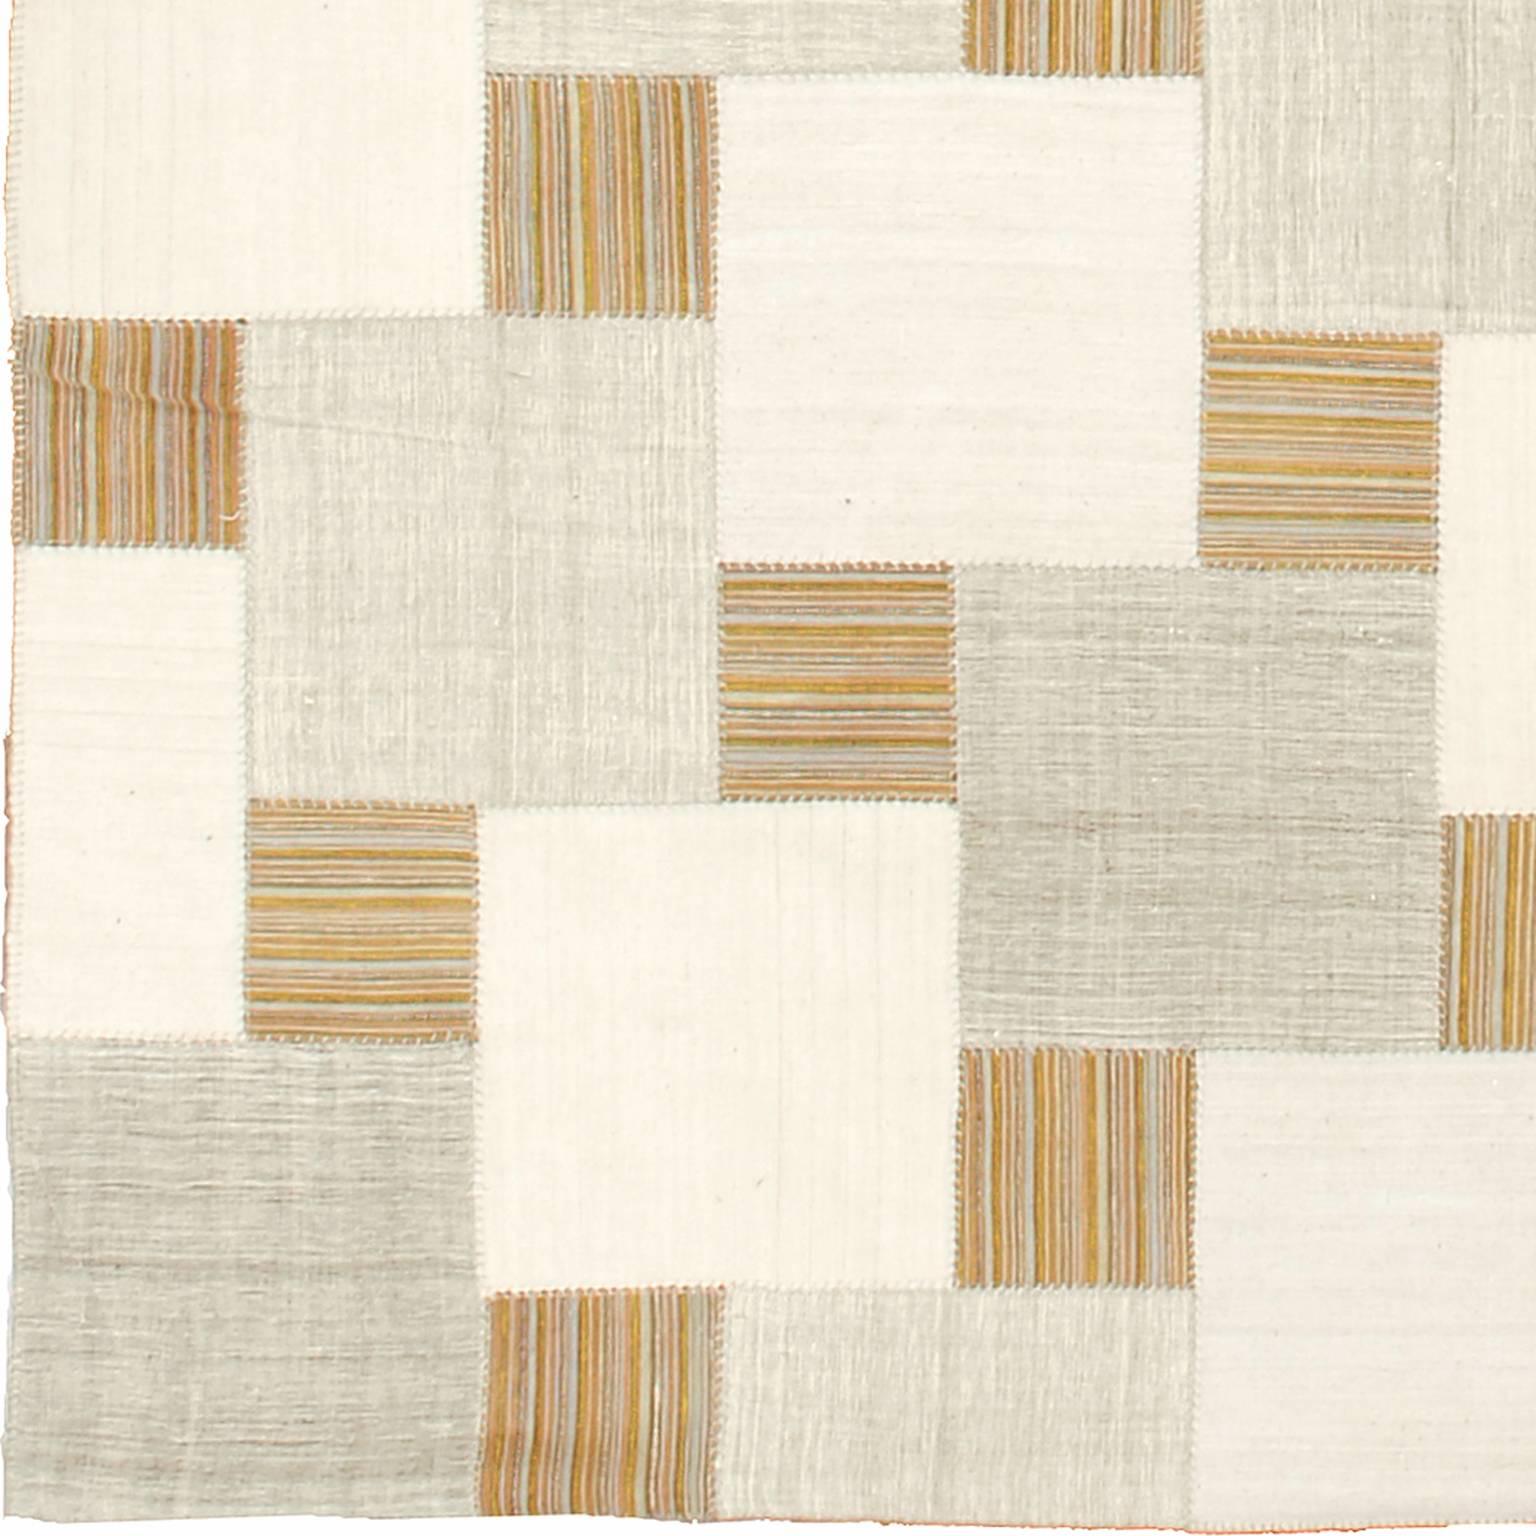 Vintage Kilim composition, ‘Langley’ design.
Turkey, circa 1940 panels.
Grey and natural linen panels, colorful wool patches. All hand woven. 
 